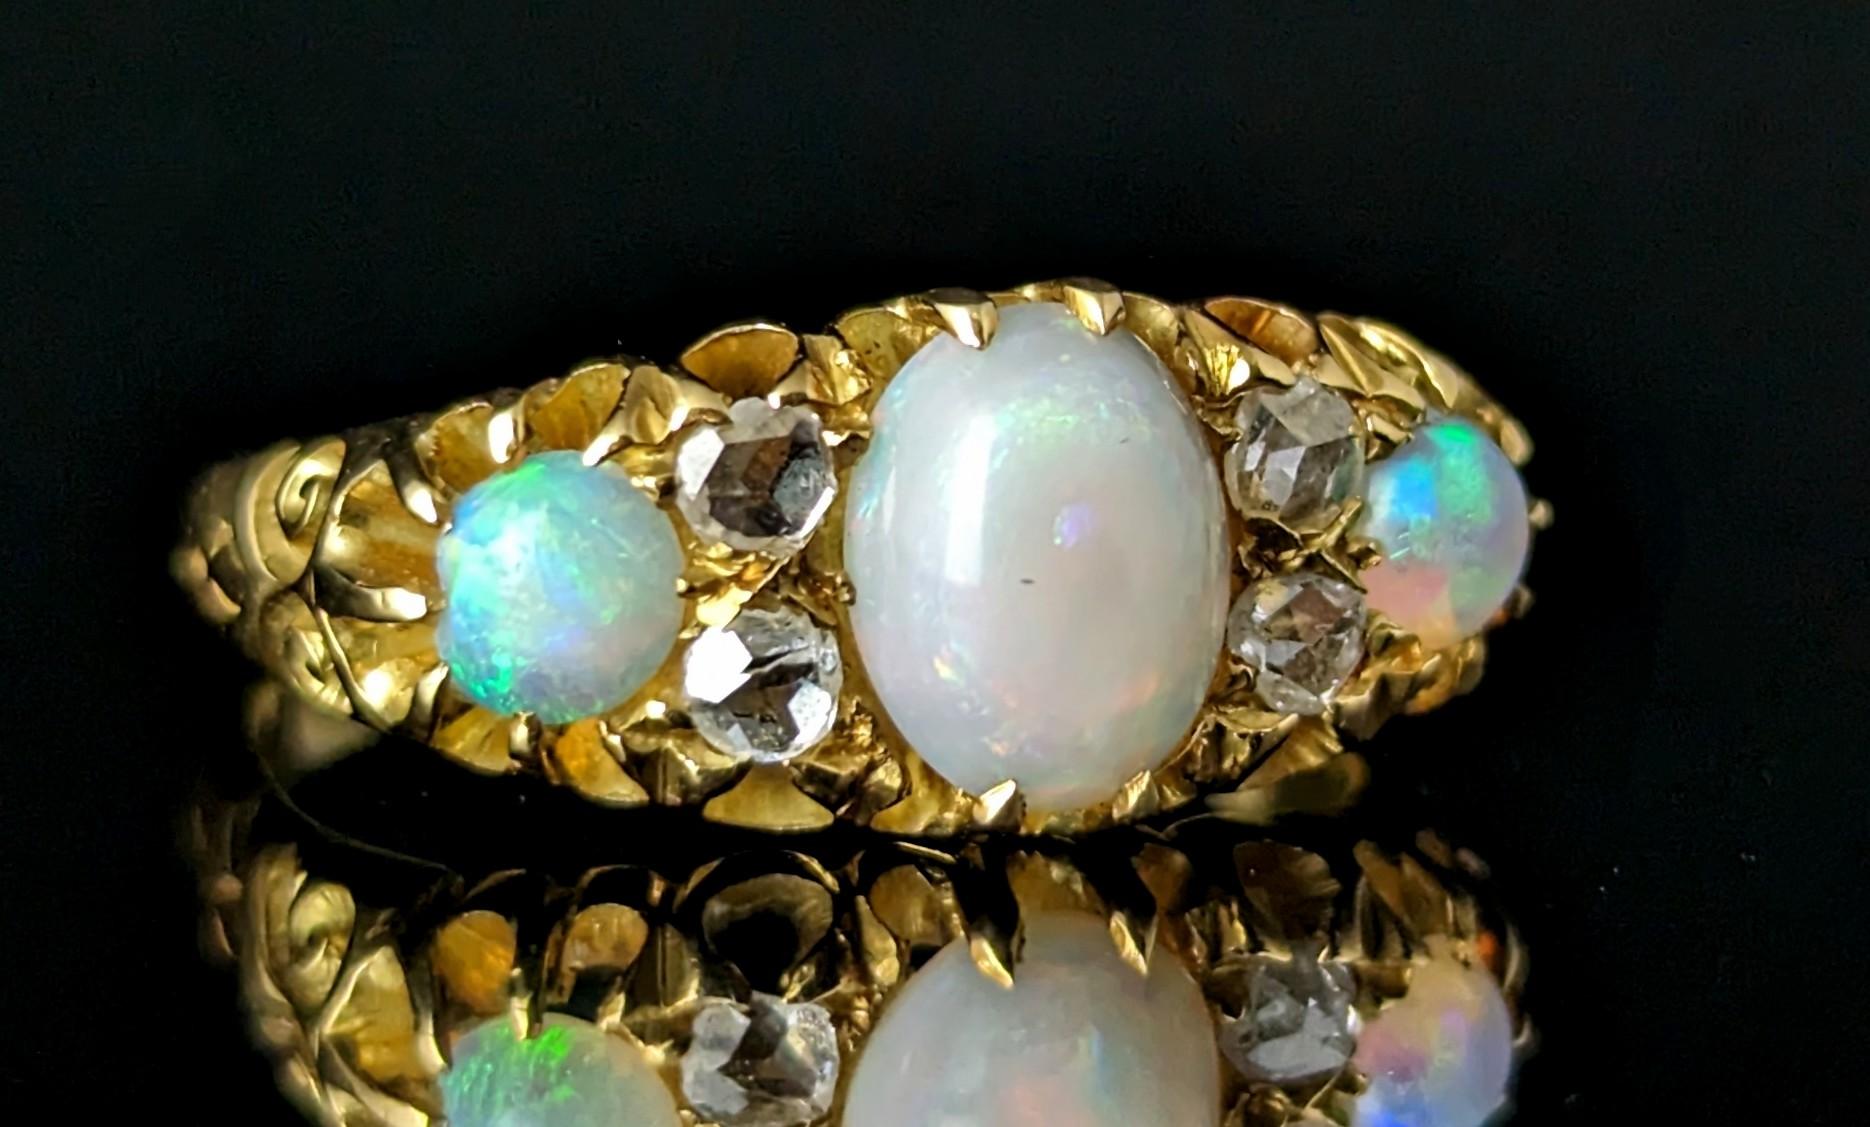 You can't help but be enchanted by this gorgeous antique, Edwardian era opal and old cut diamond ring.

A rich 18ct yellow gold band with a boat head style setting and decorative carved shoulders.

The face is set with three beautiful opal